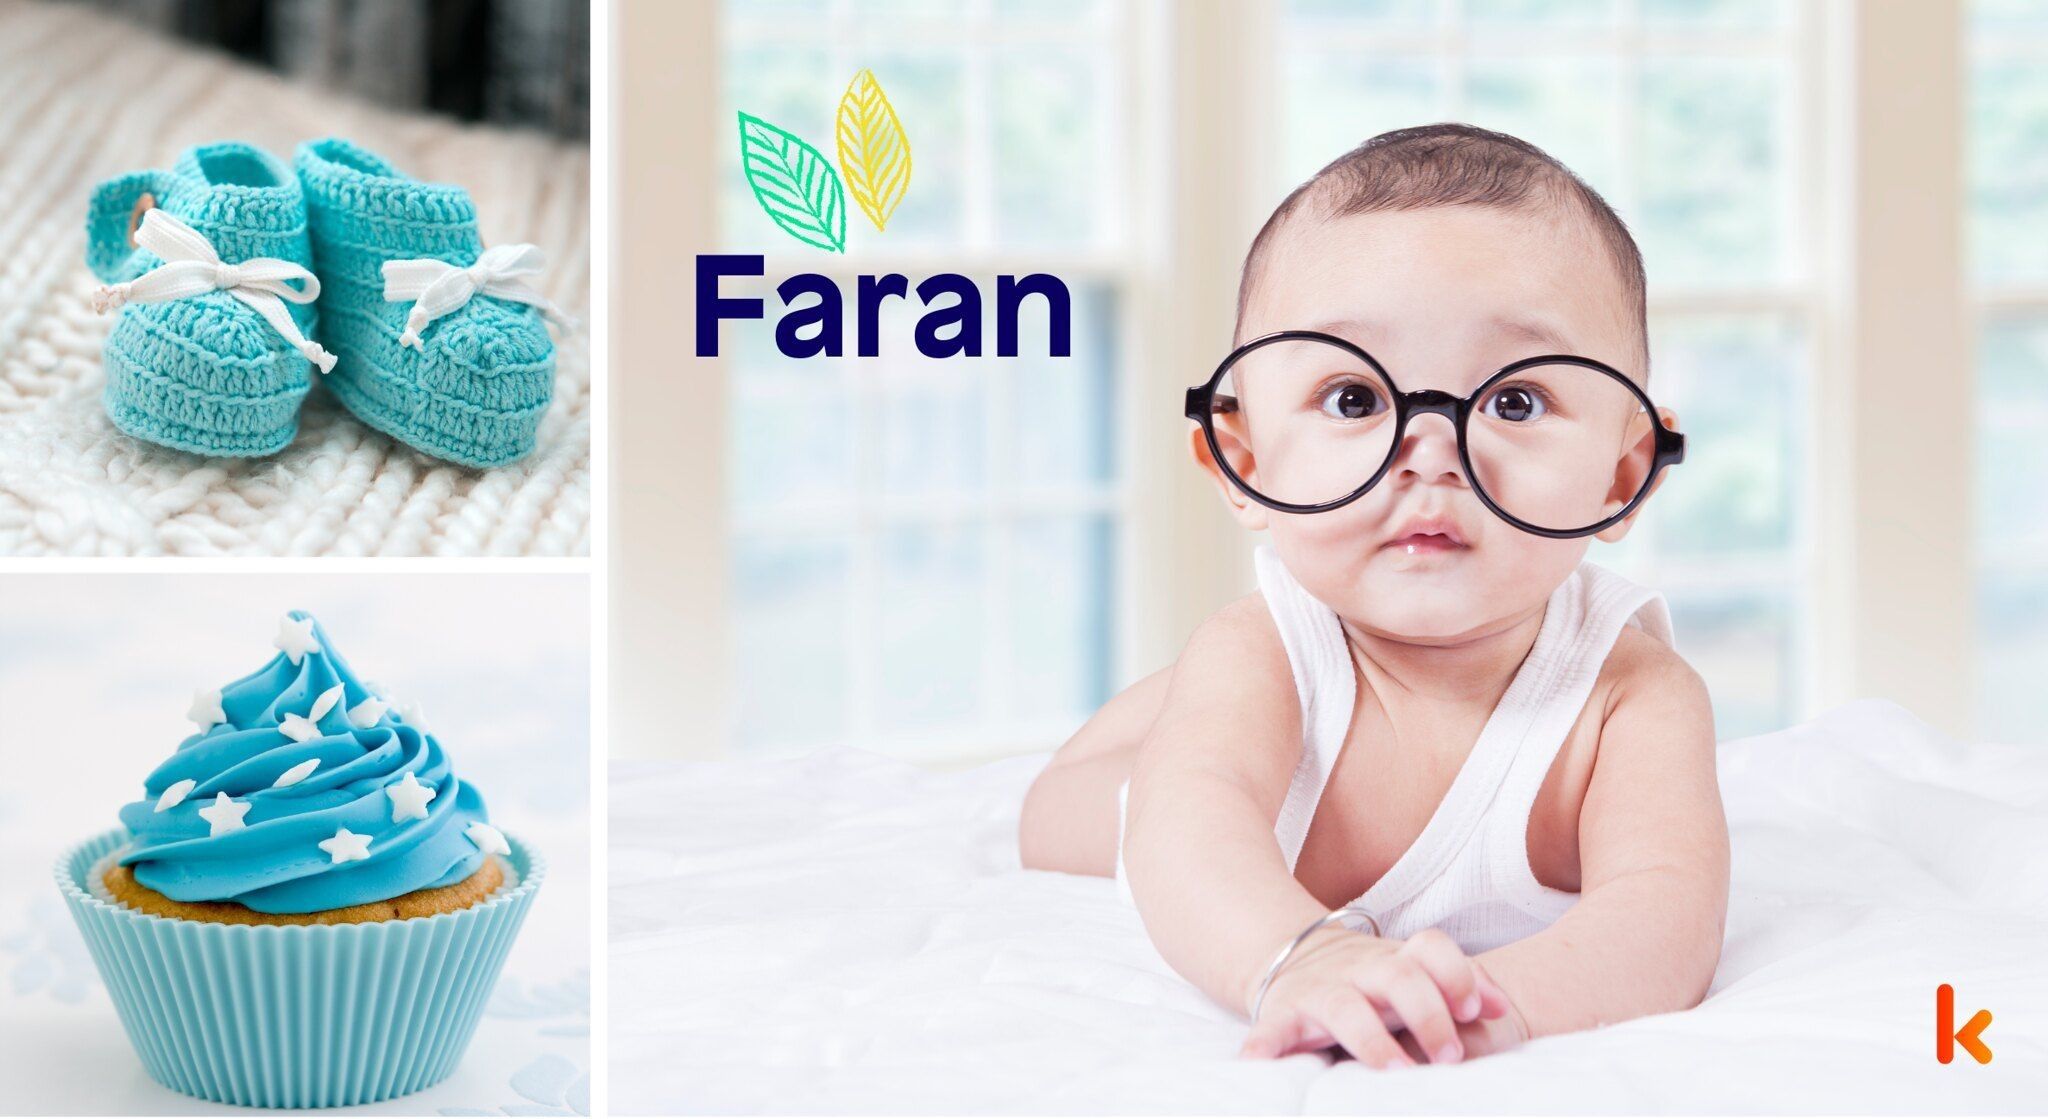 Meaning of the name Faran